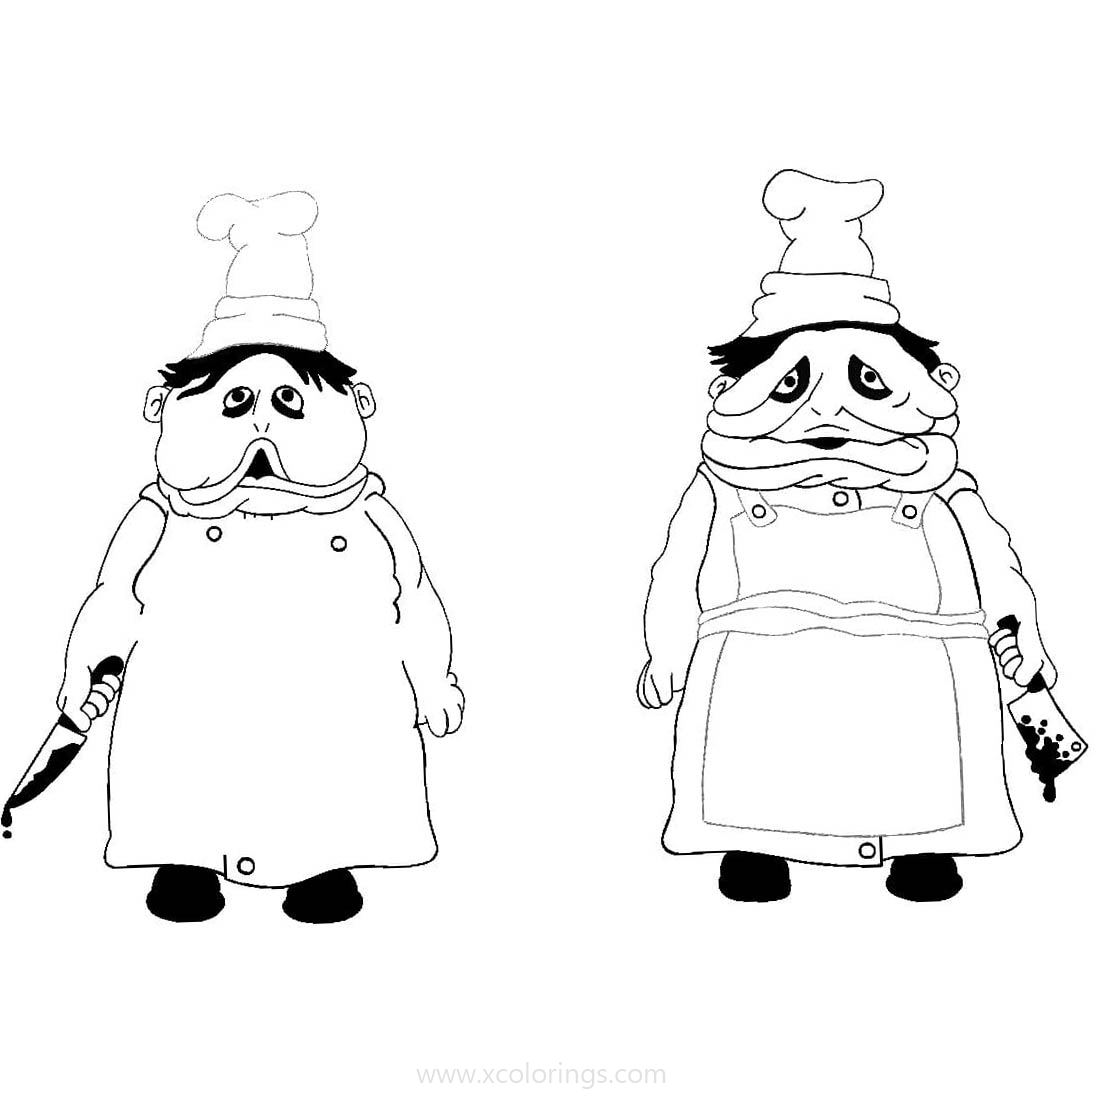 Free Little Nightmares Coloring Pages Twins Chefs printable